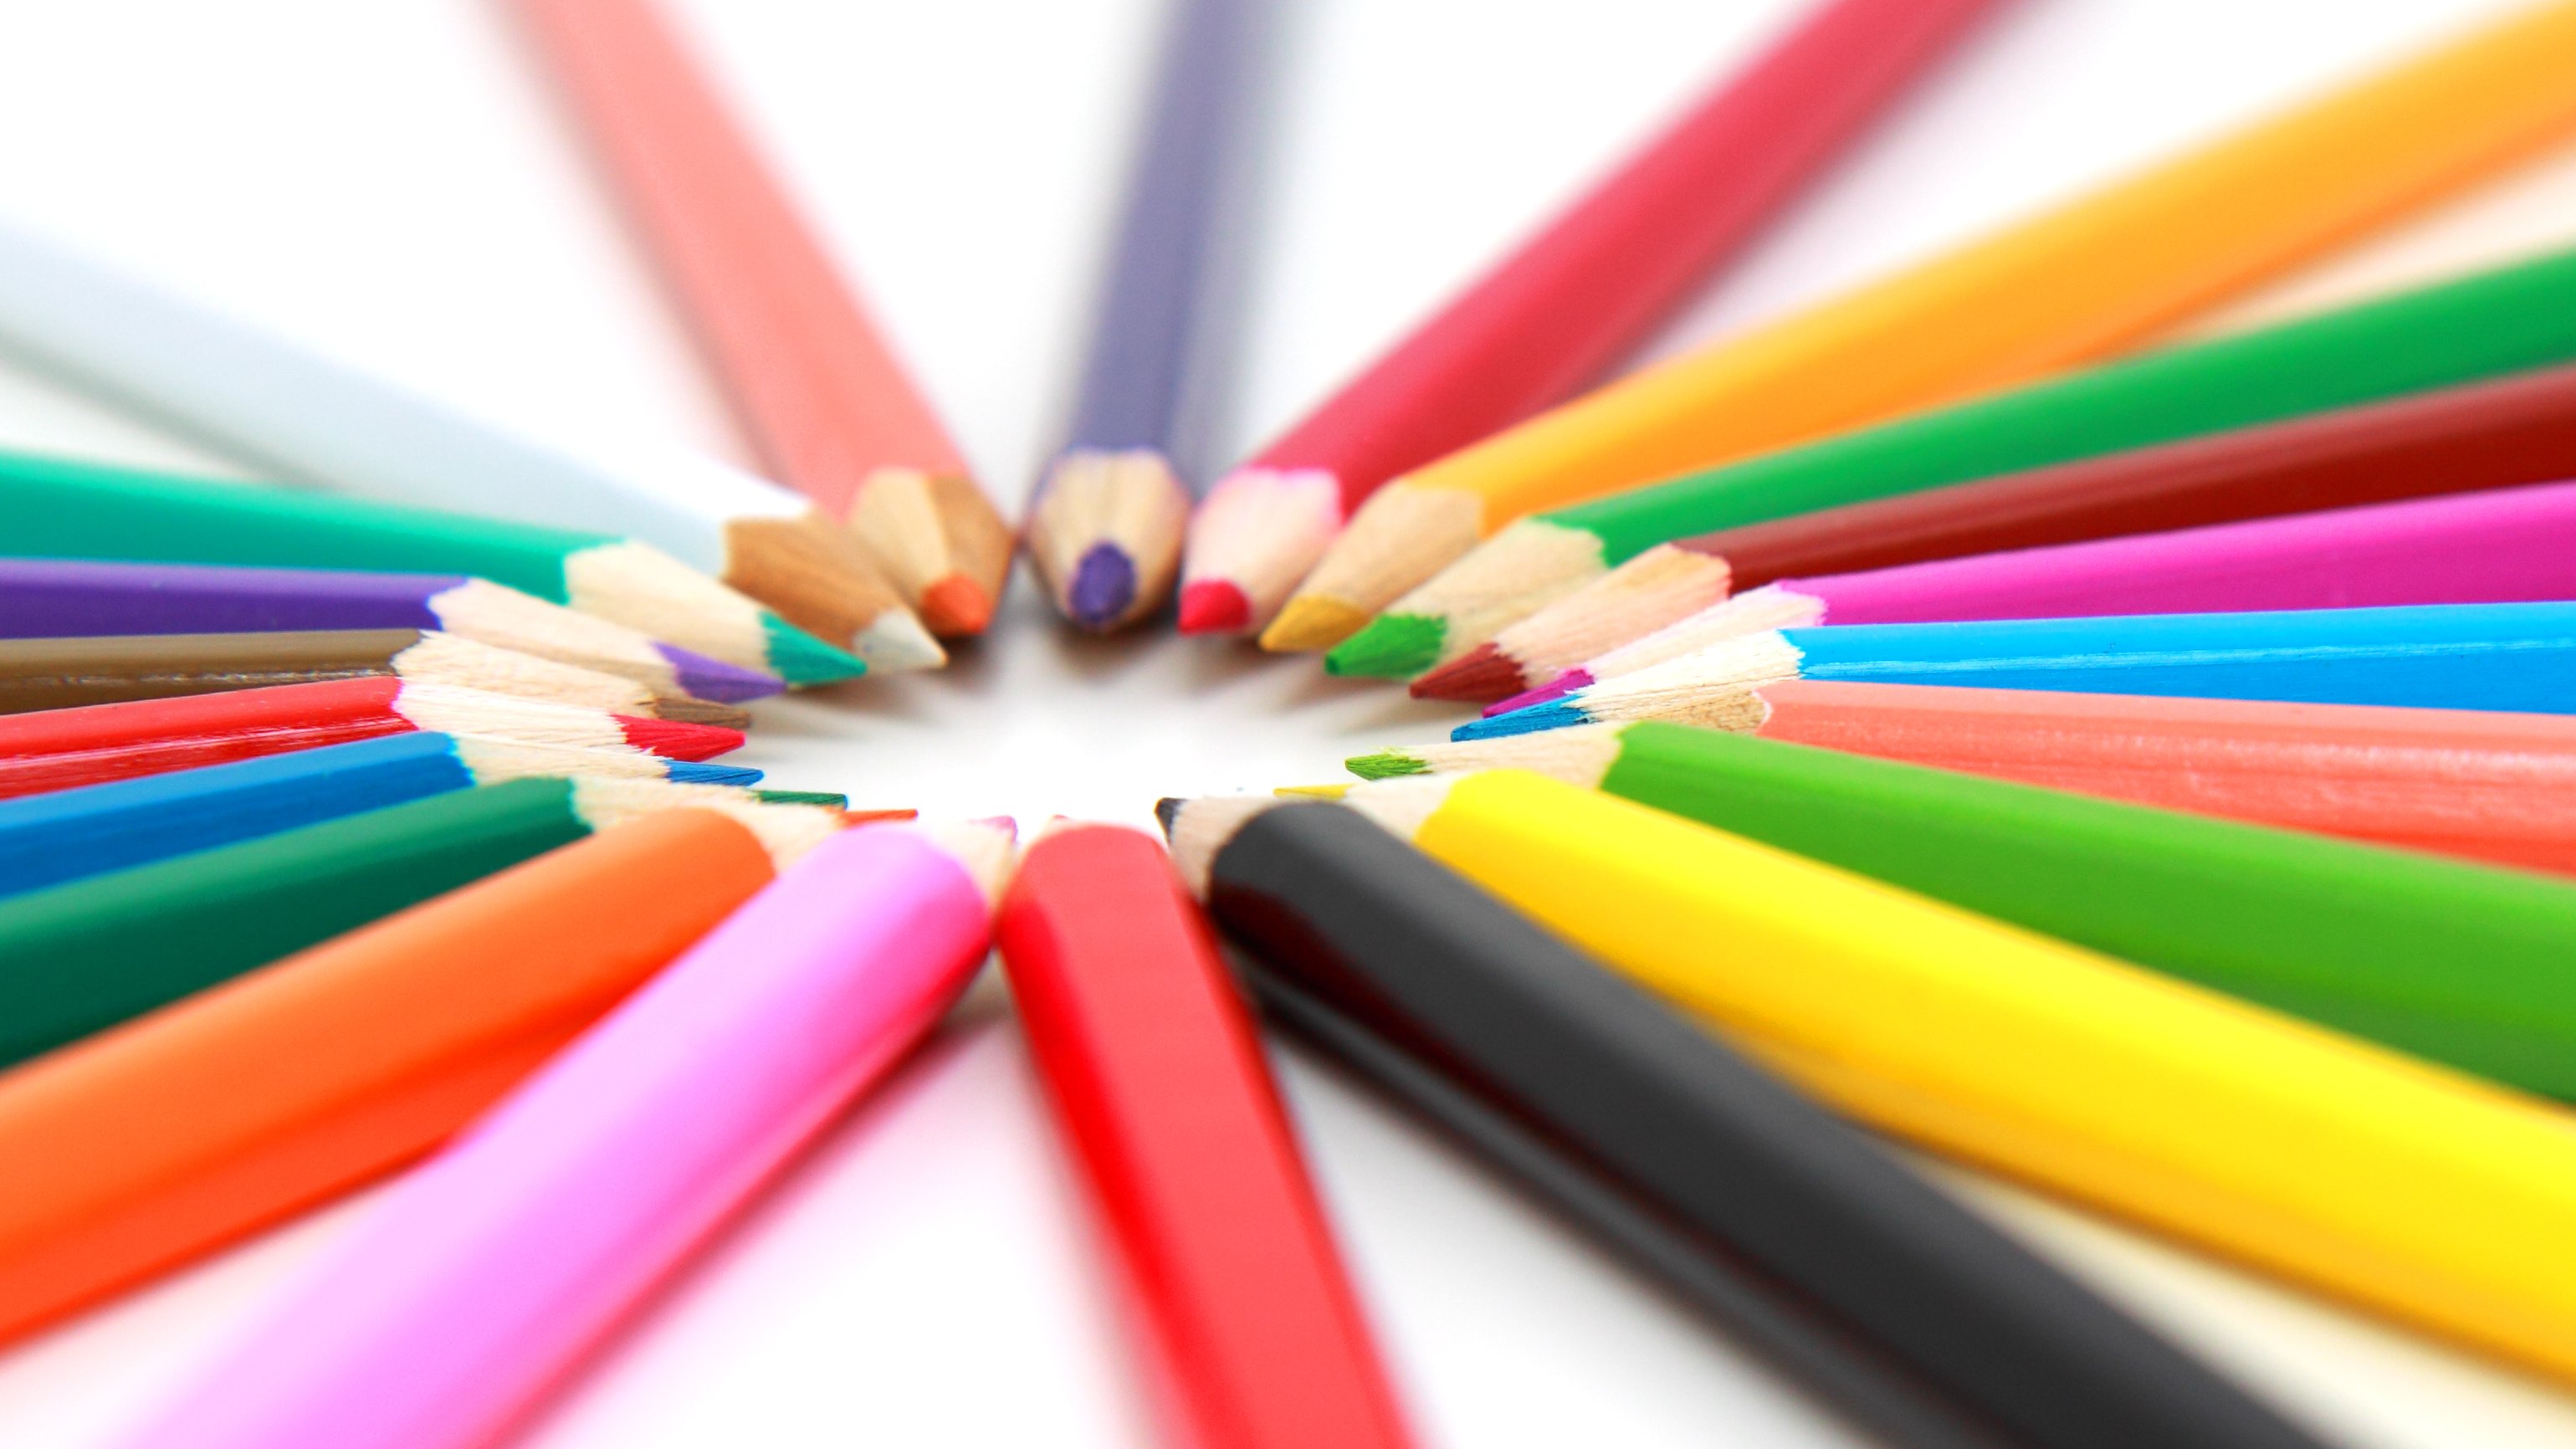 Buyer's Guide for Your Next Colored Pencil Purchase